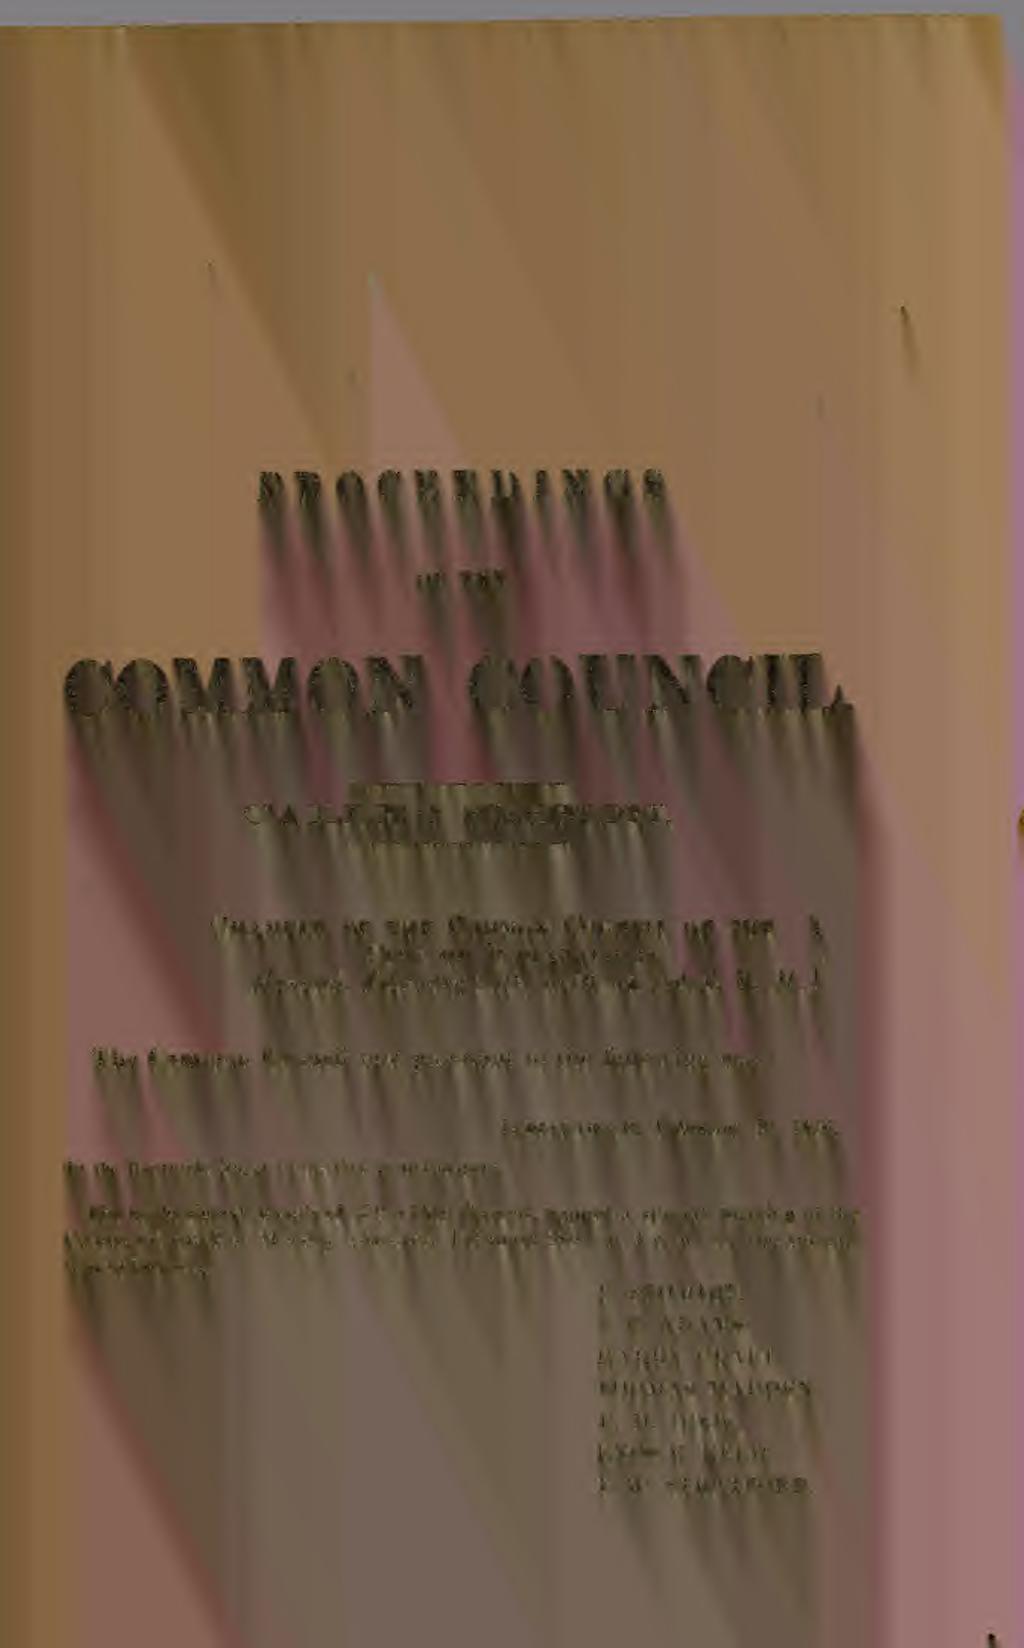 PROCEEDINGS OF THE COMMON COUNCIL. CALLED SZESSIOHST.